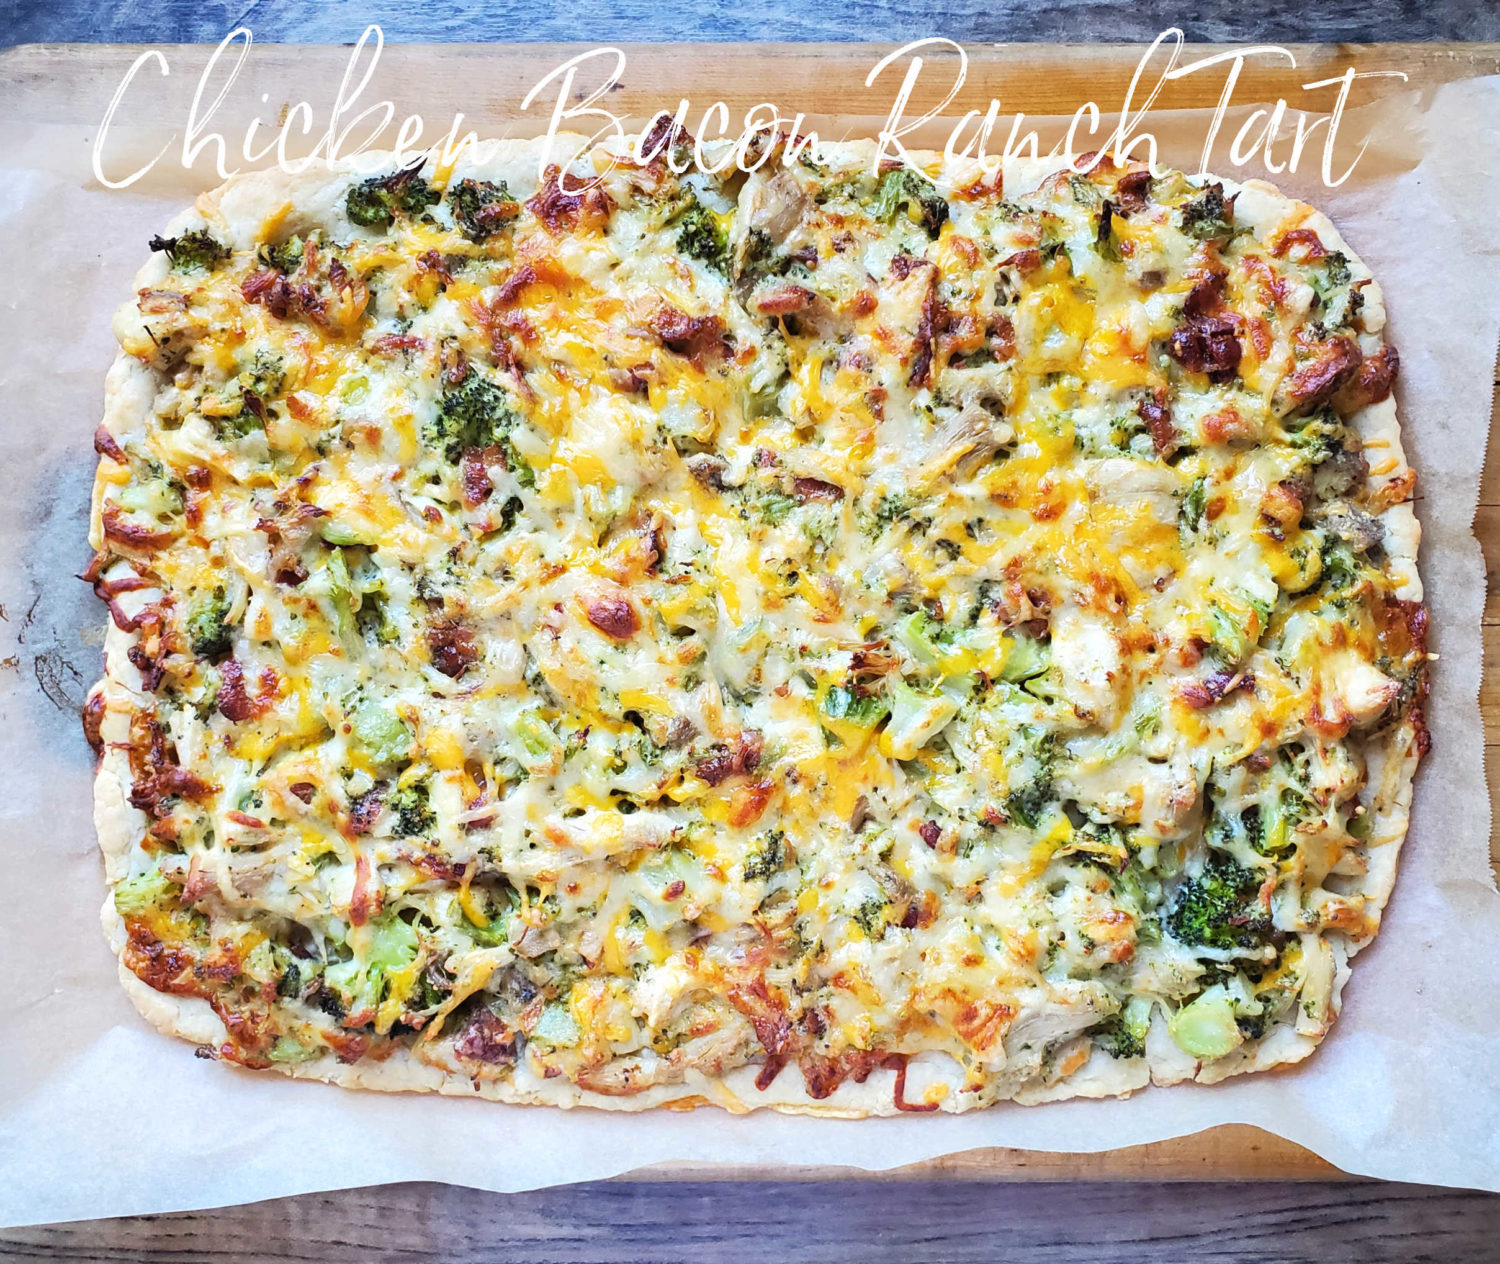 Chicken Bacon Ranch Tart: Chicken, bacon, ranch seasoning, and veggies, sizzling hot with melted cheeses, and a tender flaky sour cream crust